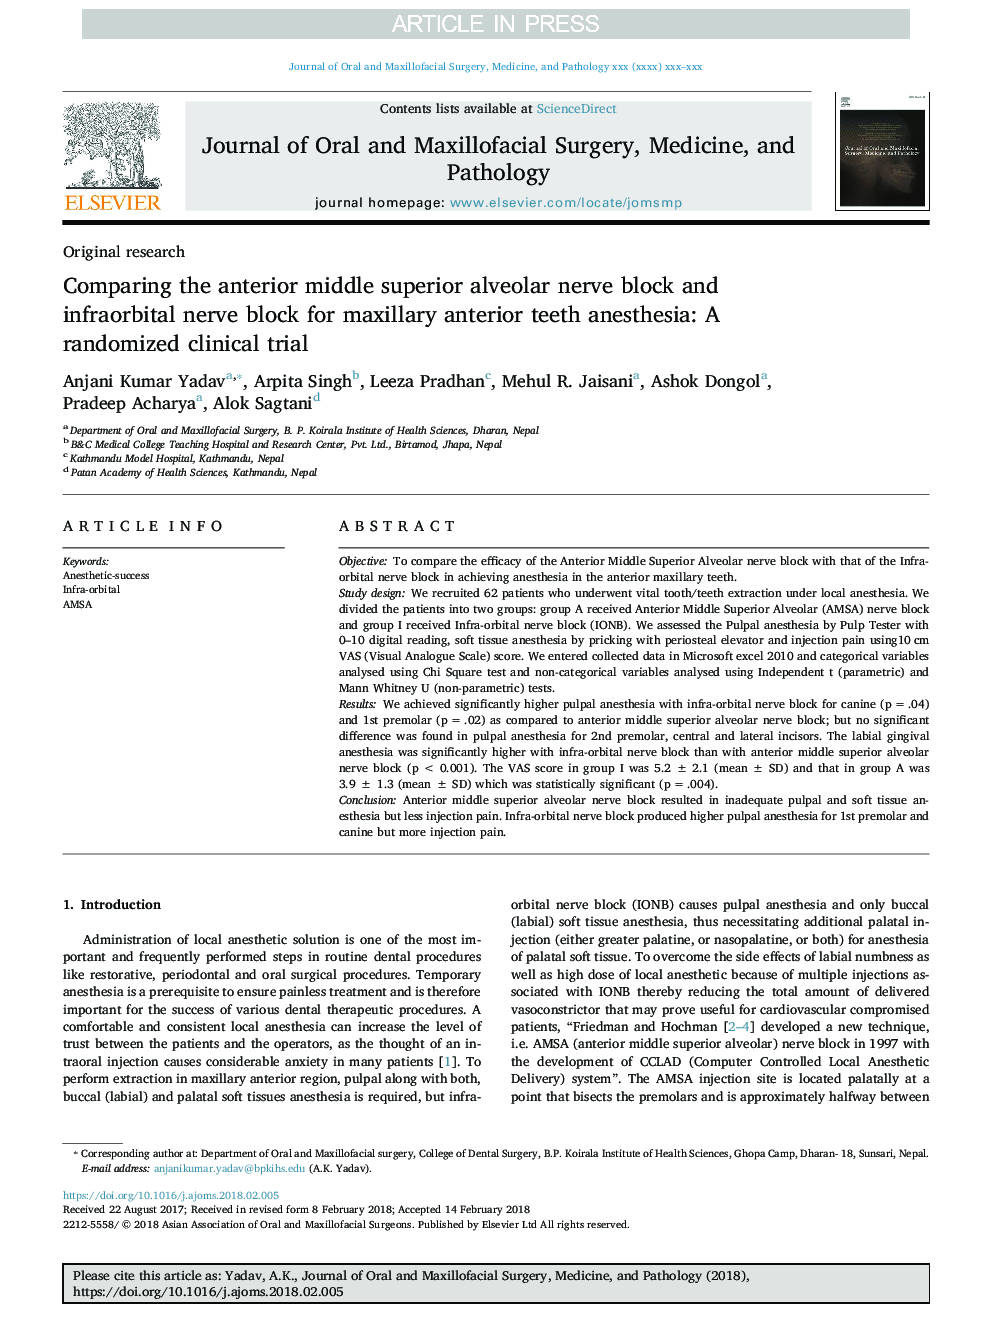 Comparing the anterior middle superior alveolar nerve block and infraorbital nerve block for maxillary anterior teeth anesthesia: A randomized clinical trial